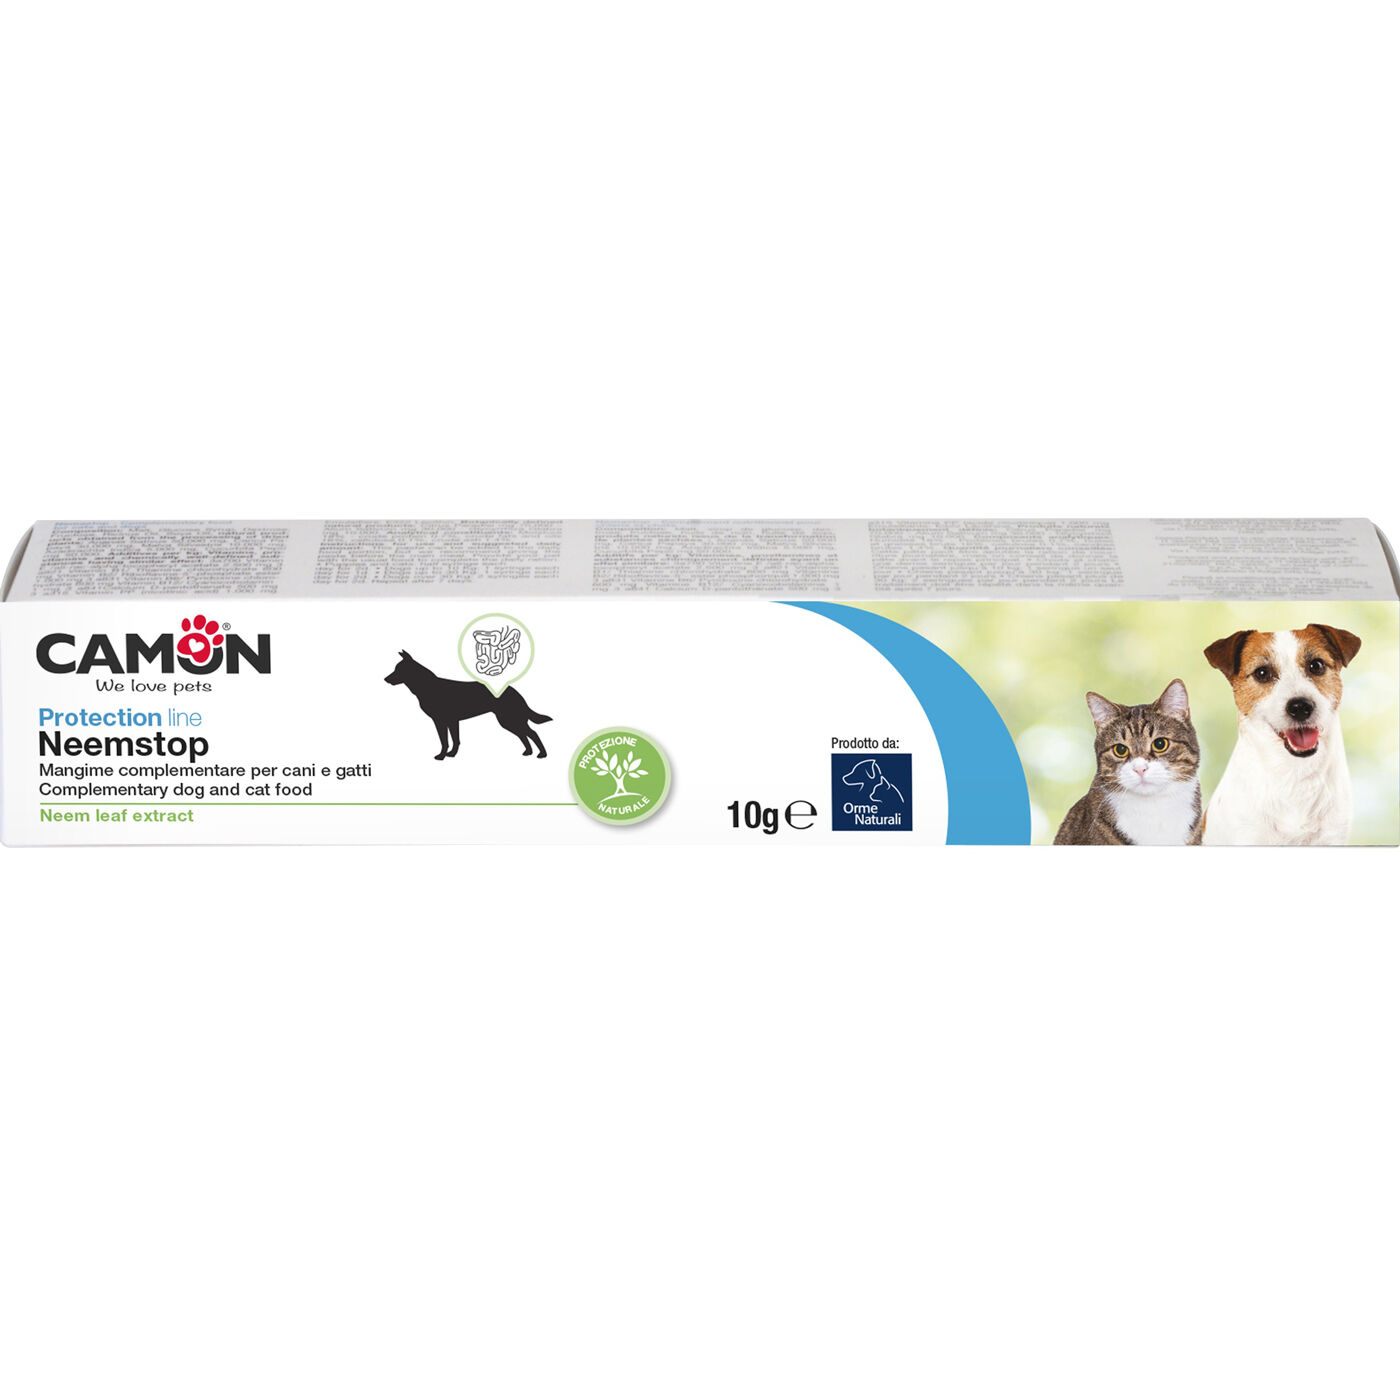 Camon-orme-naturali-protection-nemmstop-fuer-hund-katze-front-CO-G920